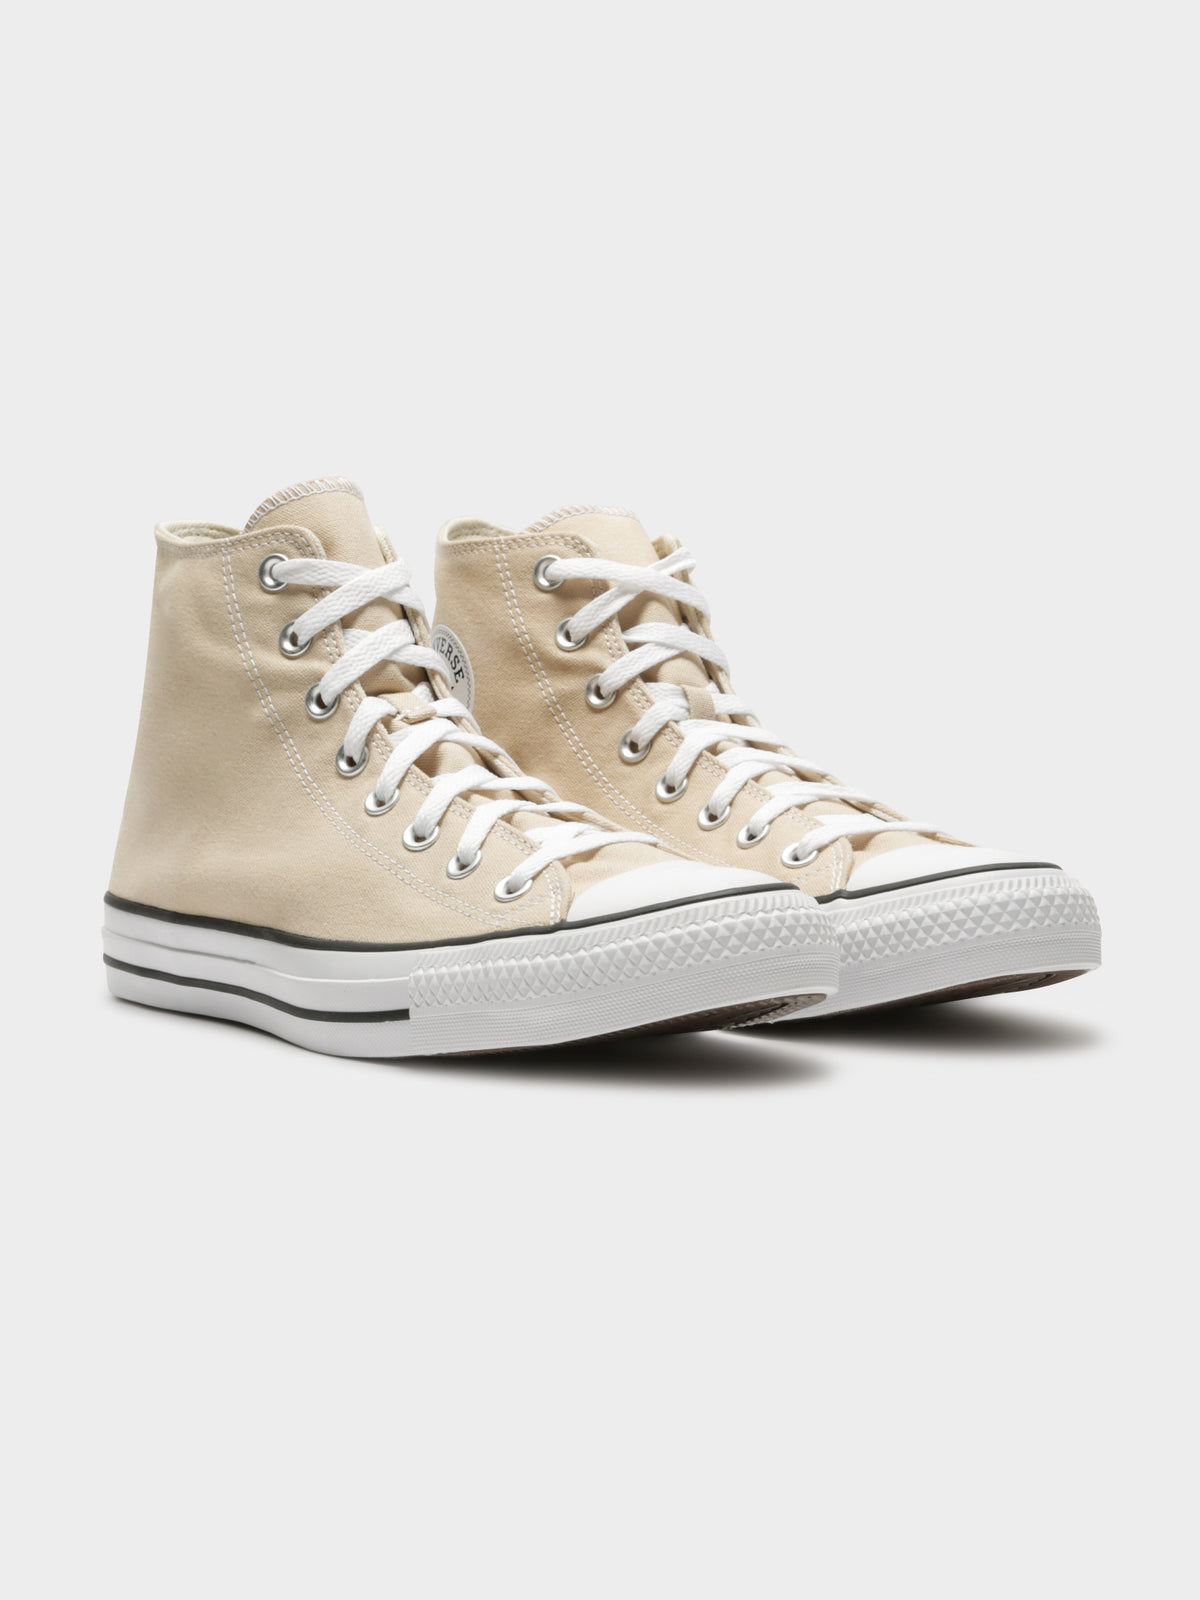 Unisex Chuck Taylor High Top Sneakers in Farro